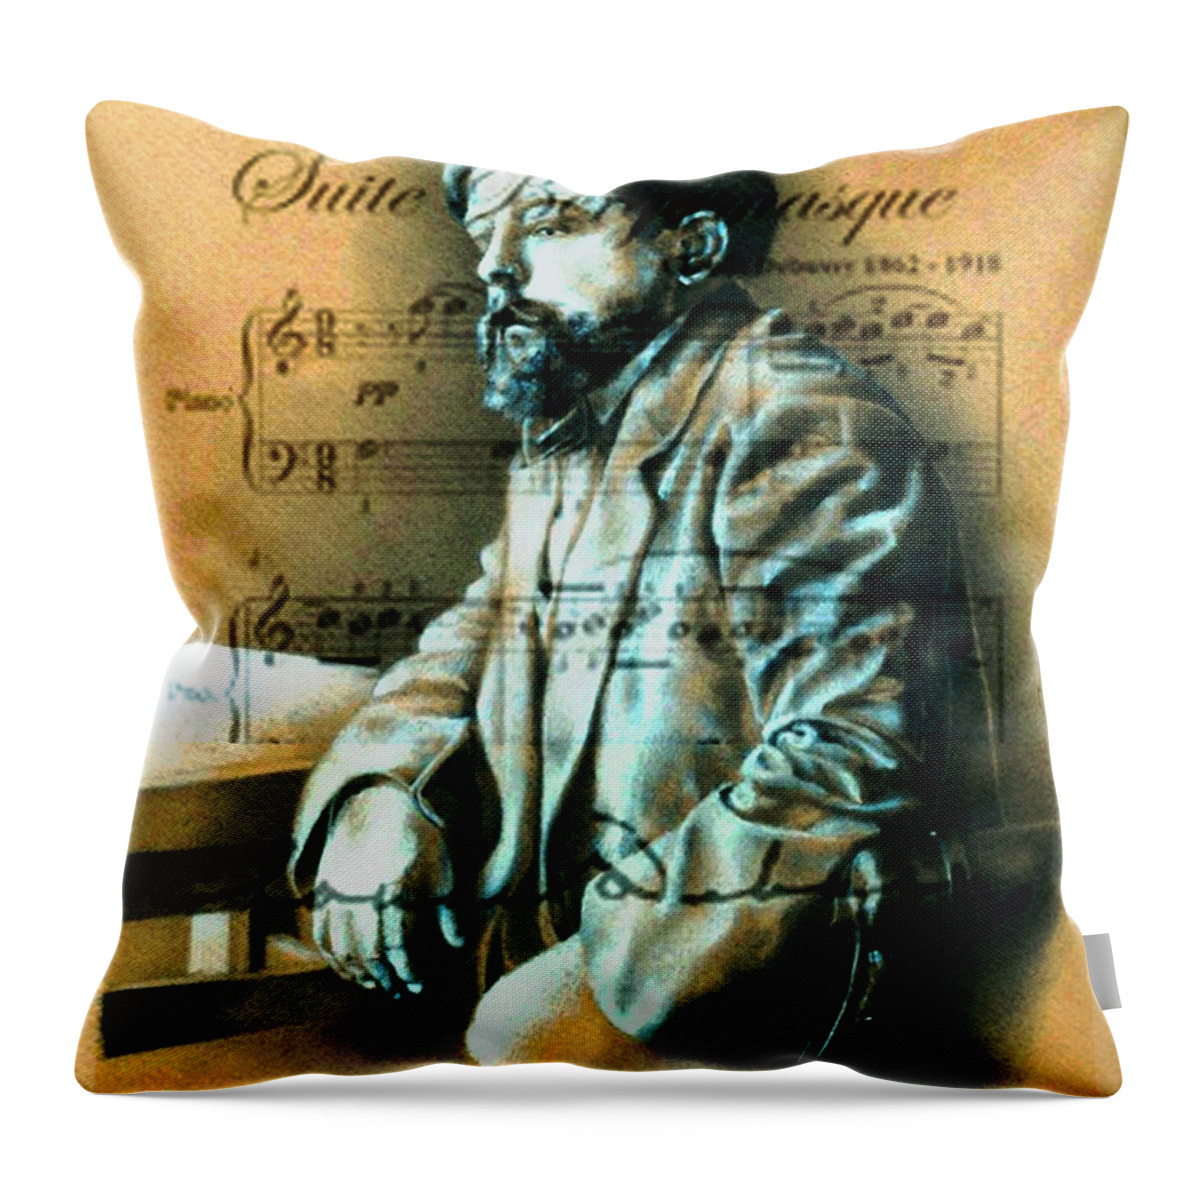 Classical Music Throw Pillow featuring the digital art Claude Debussy by John Vincent Palozzi